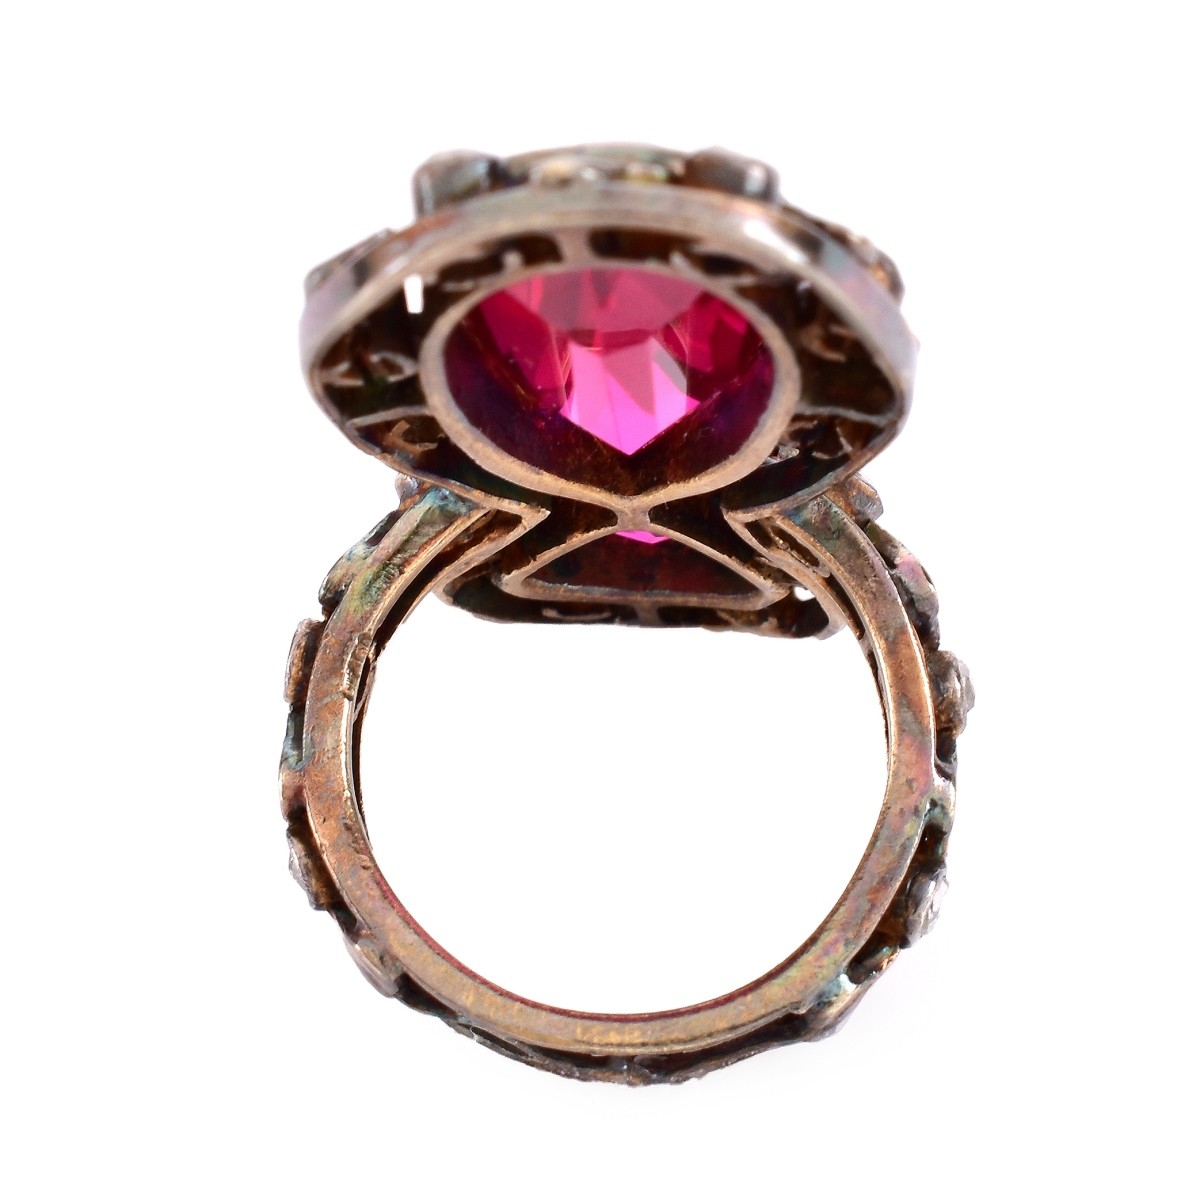 Antique Diamond Man Made Ruby, Silver & Gold Ring